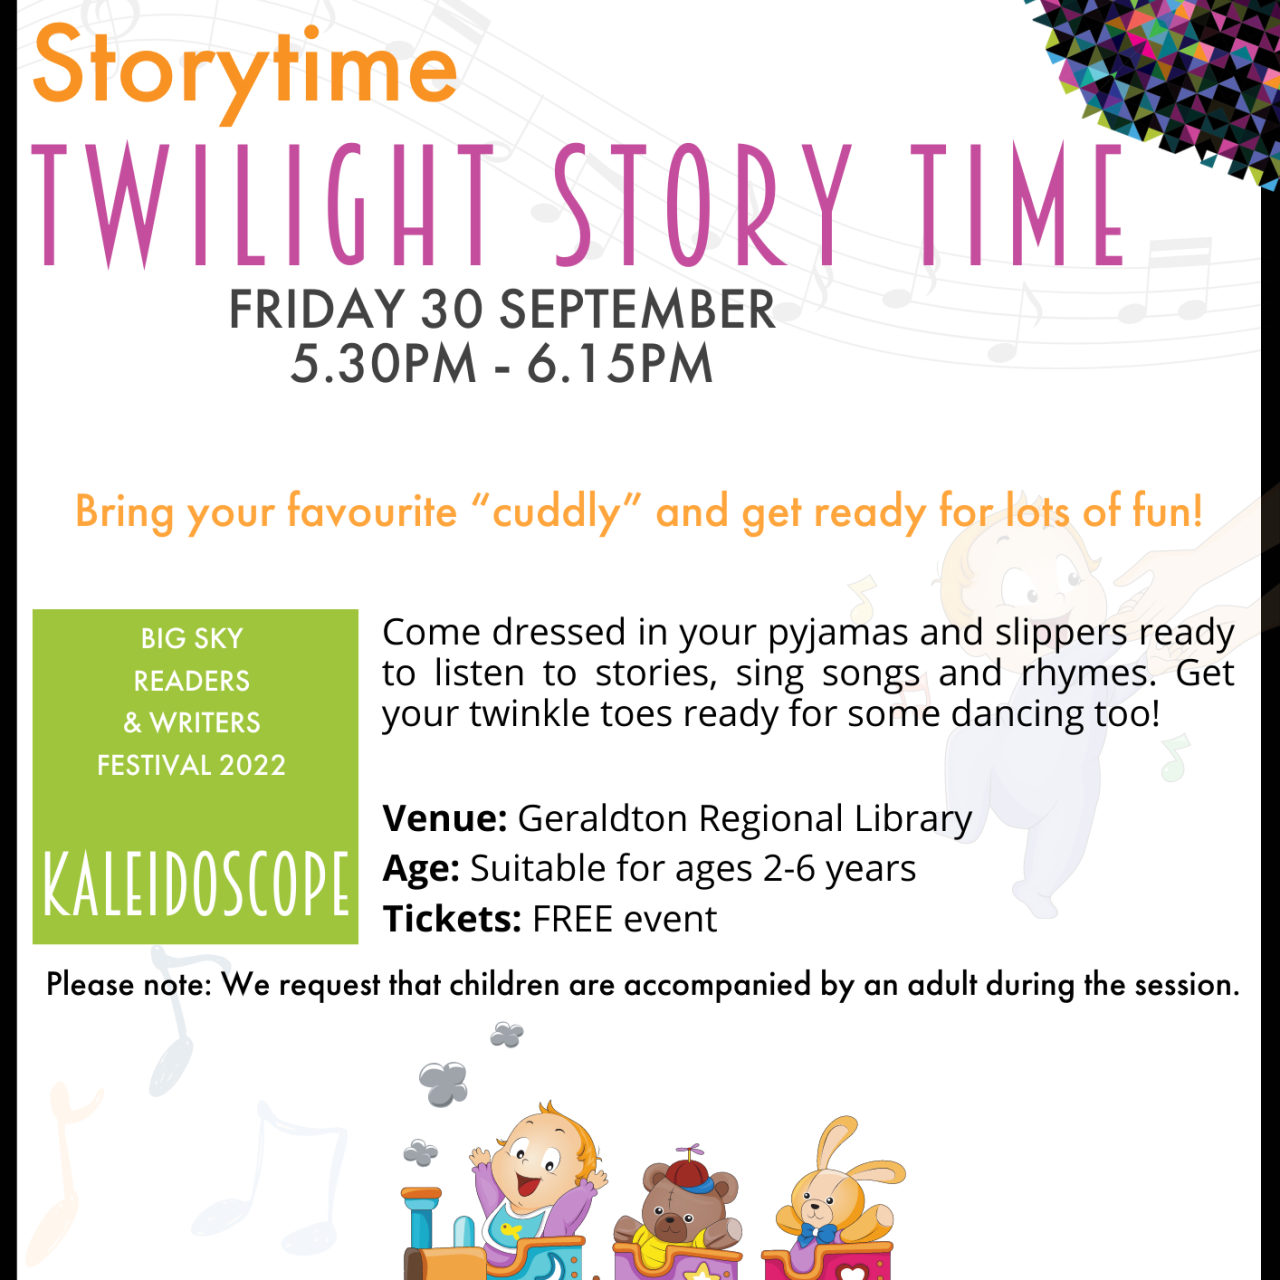 Twilight Story Time